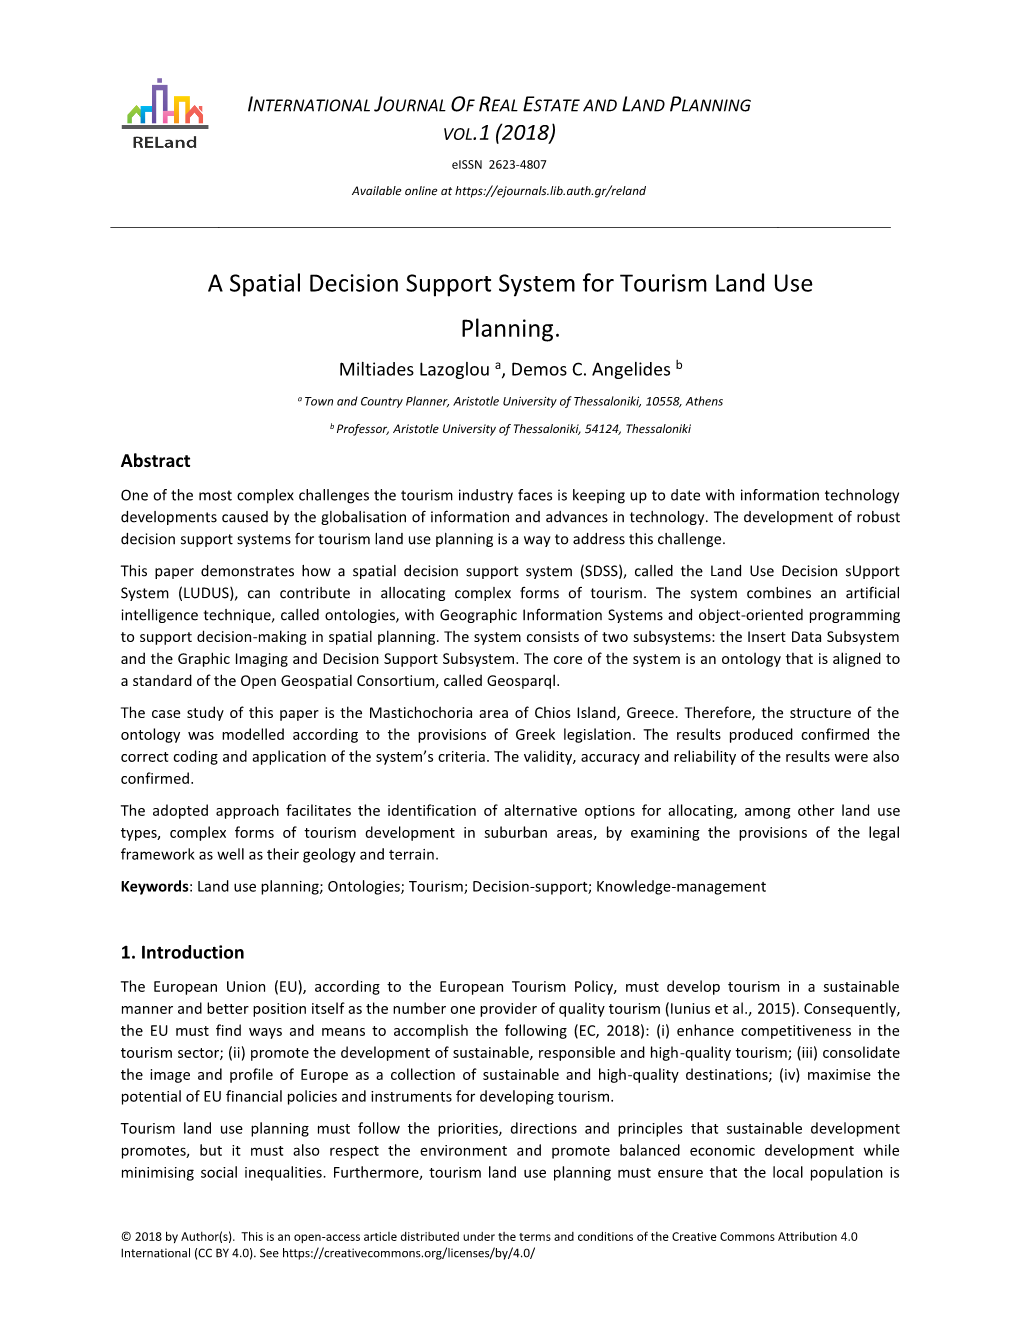 A Spatial Decision Support System for Tourism Land Use Planning. Miltiades Lazoglou A, Demos C